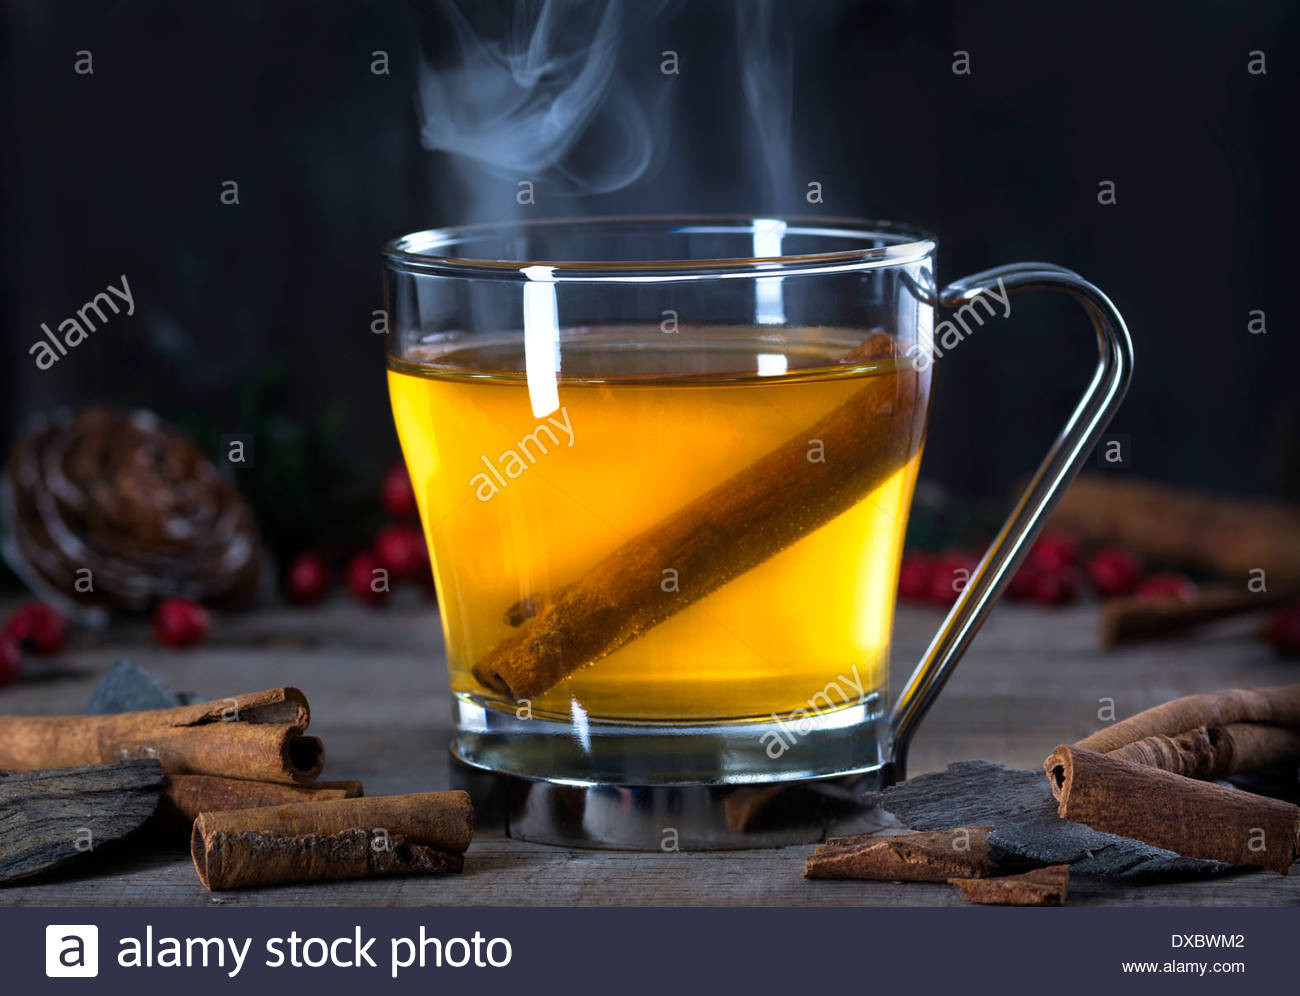 Hot Whiskey Drinks
 Hot whiskey rum apple or brandy toddy cocktail drink